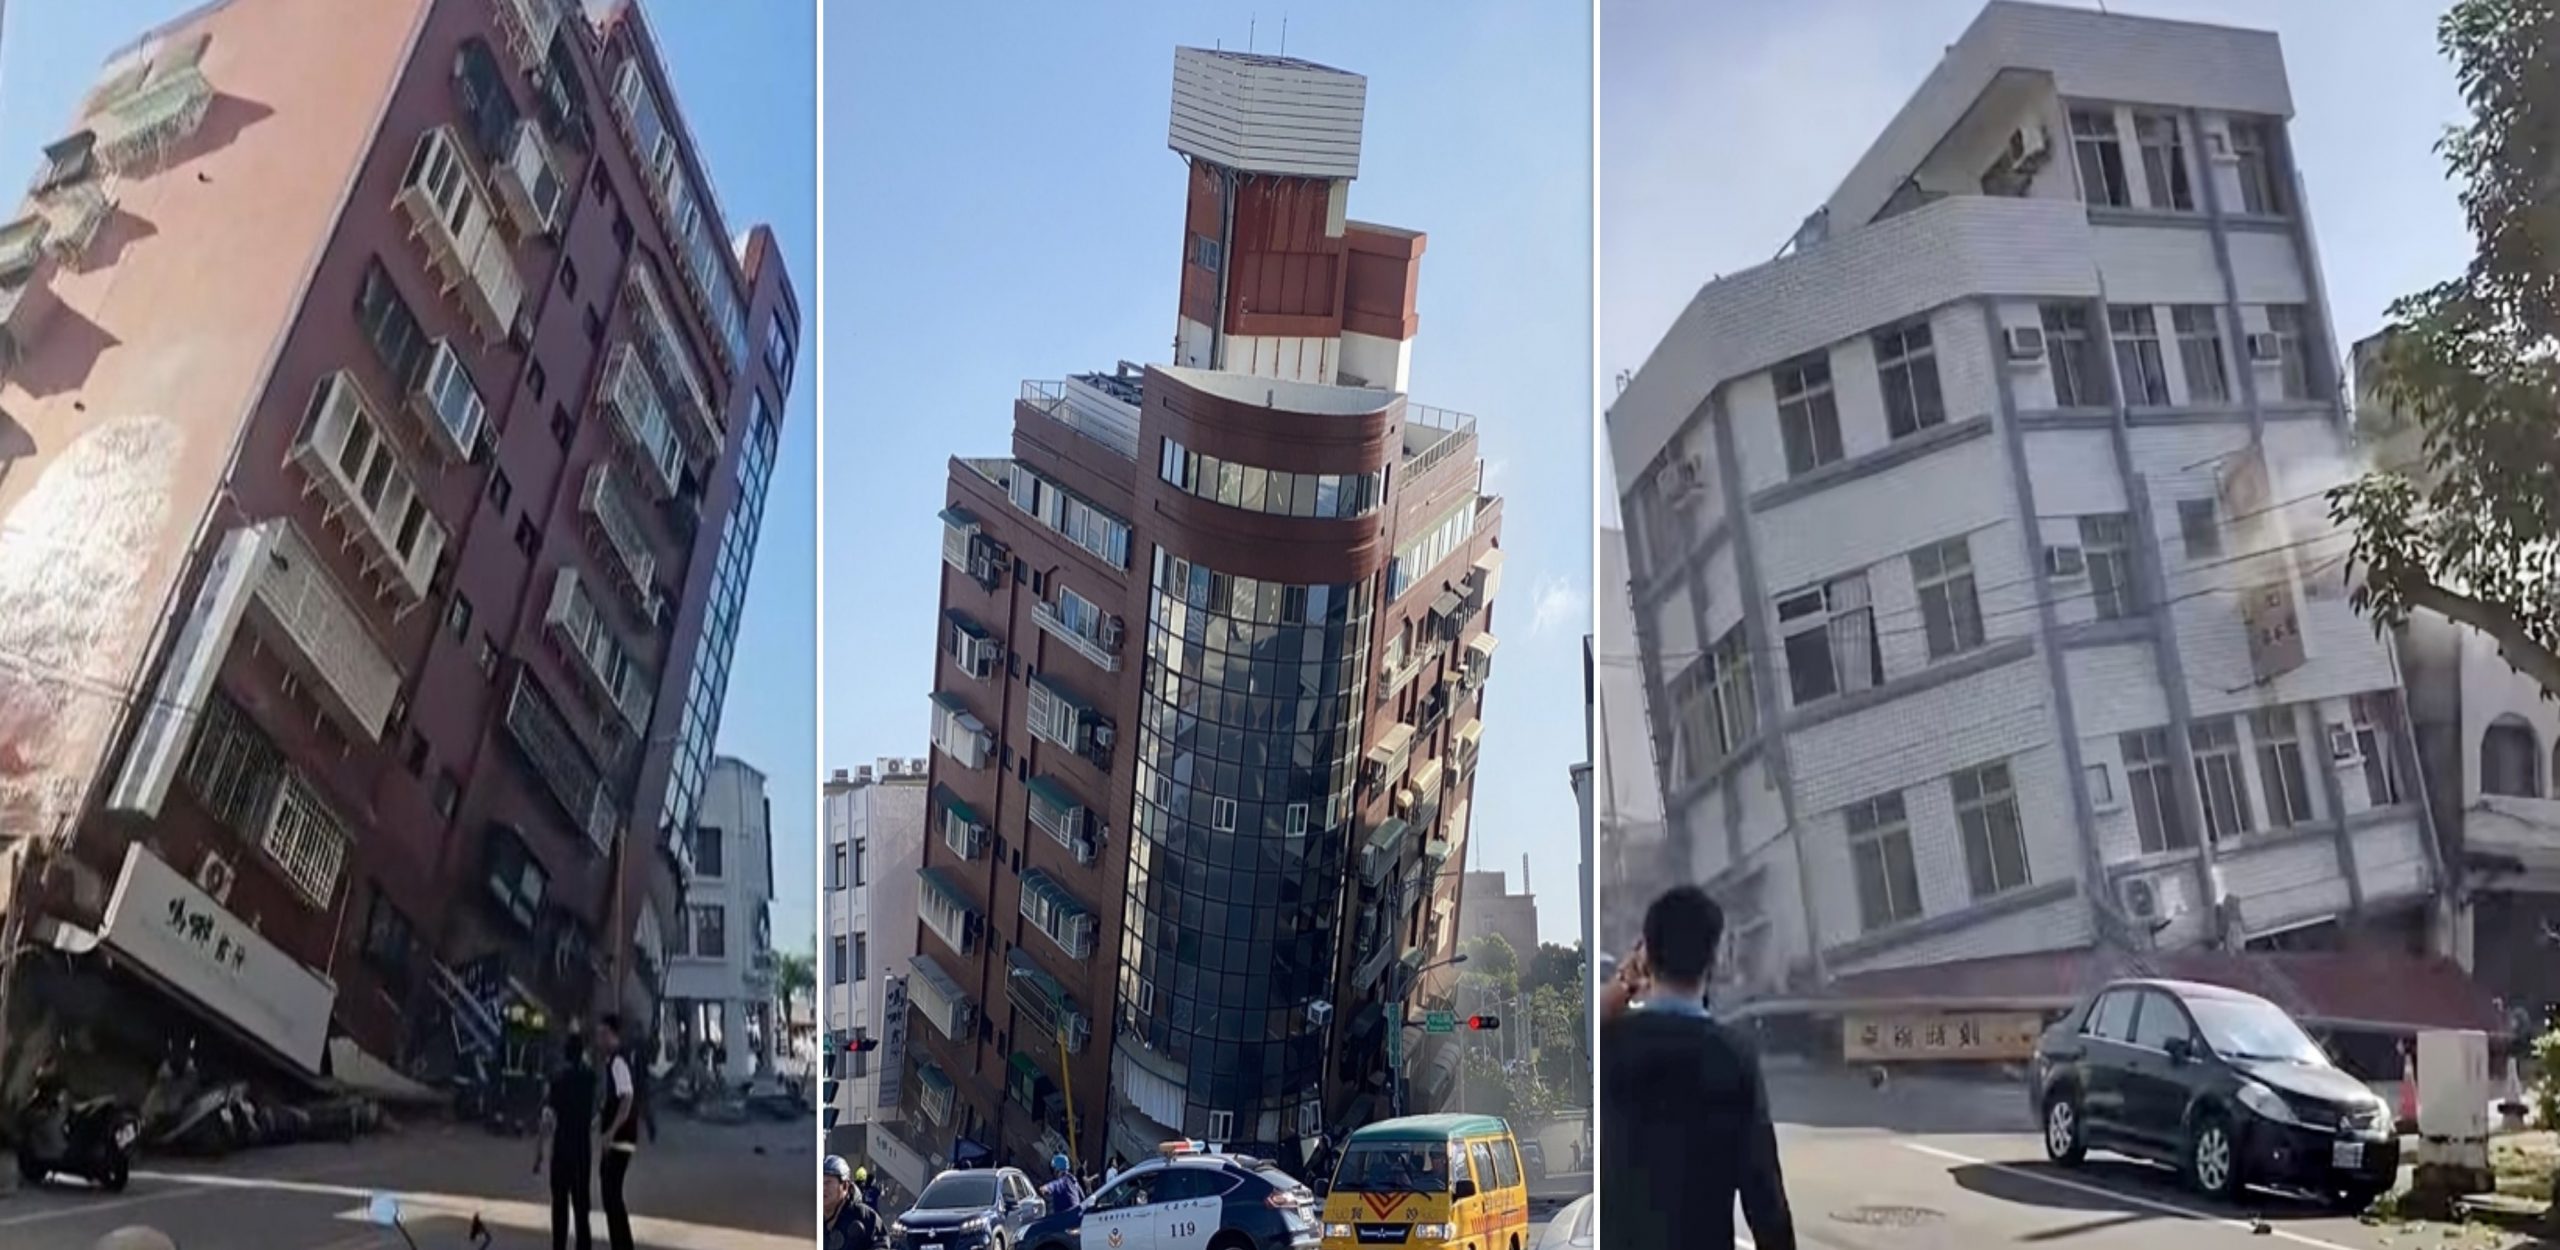 Powerful earthquake in Taiwan causes damage to buildings (images)